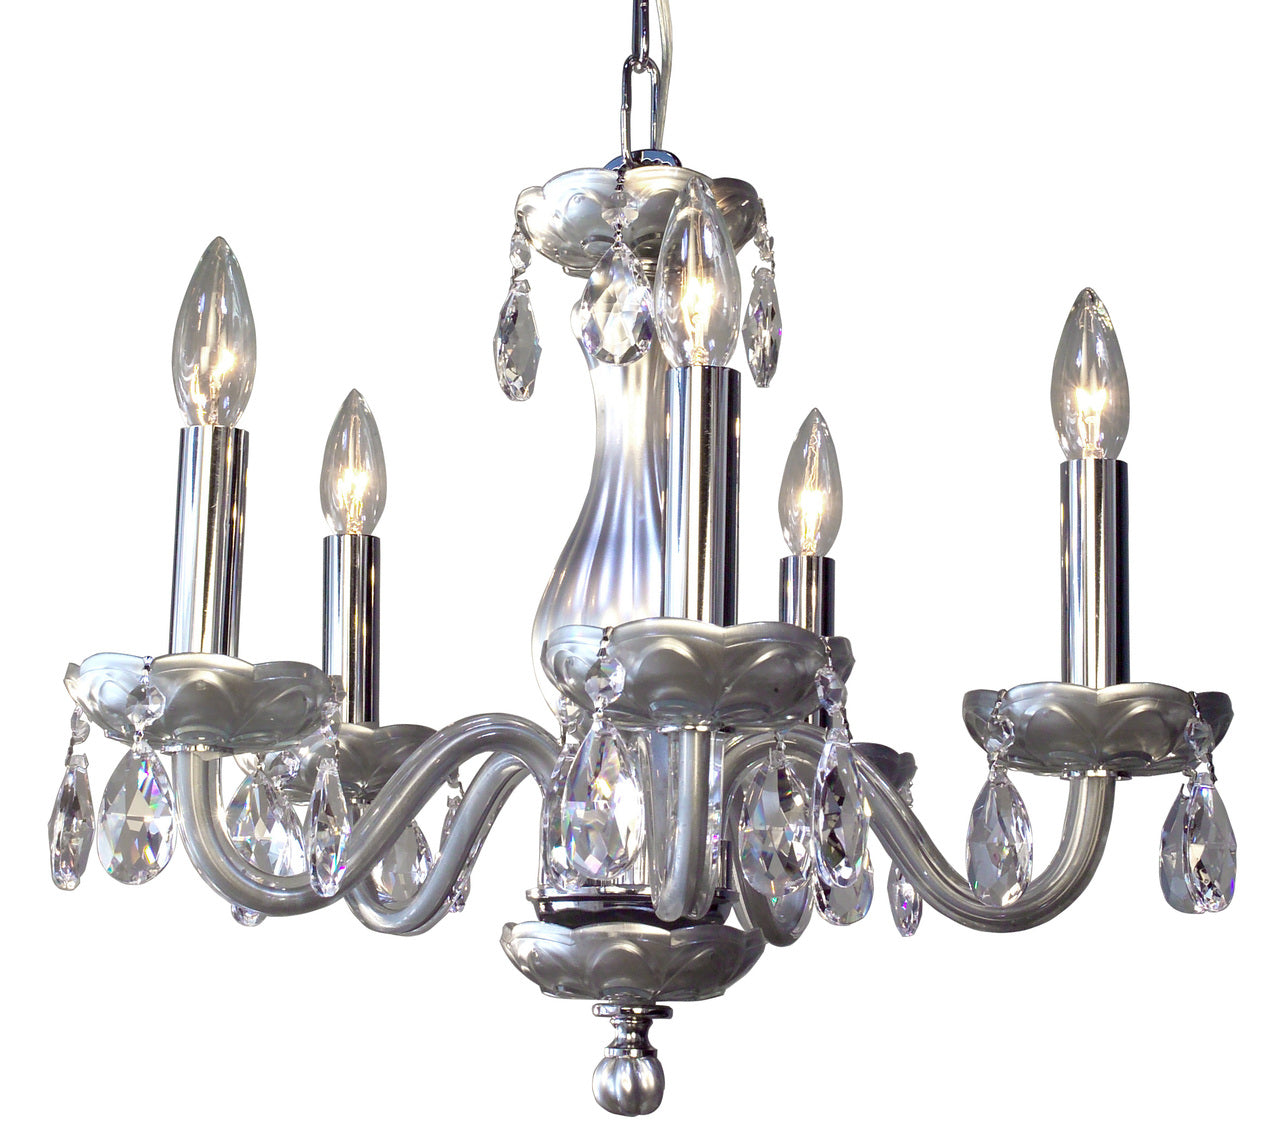 Classic Lighting 82045 SIL CPFR Monaco Crystal Chandelier in Silver (Imported from Spain)